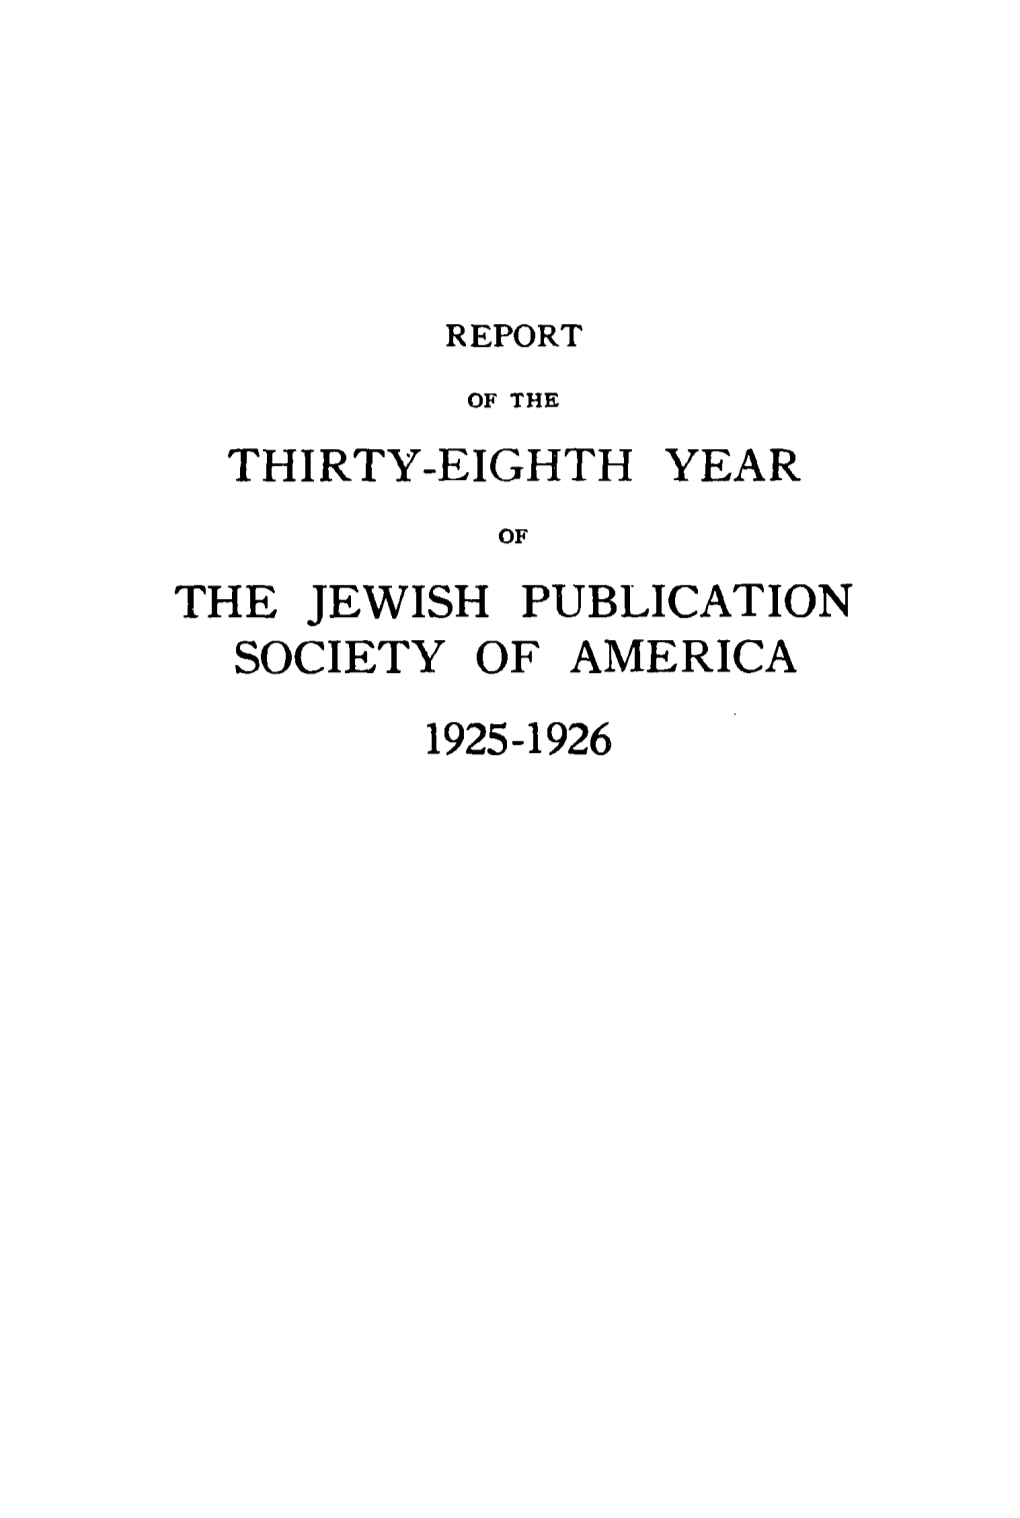 Report of the Jewish Publication Society of America (1926-1927)